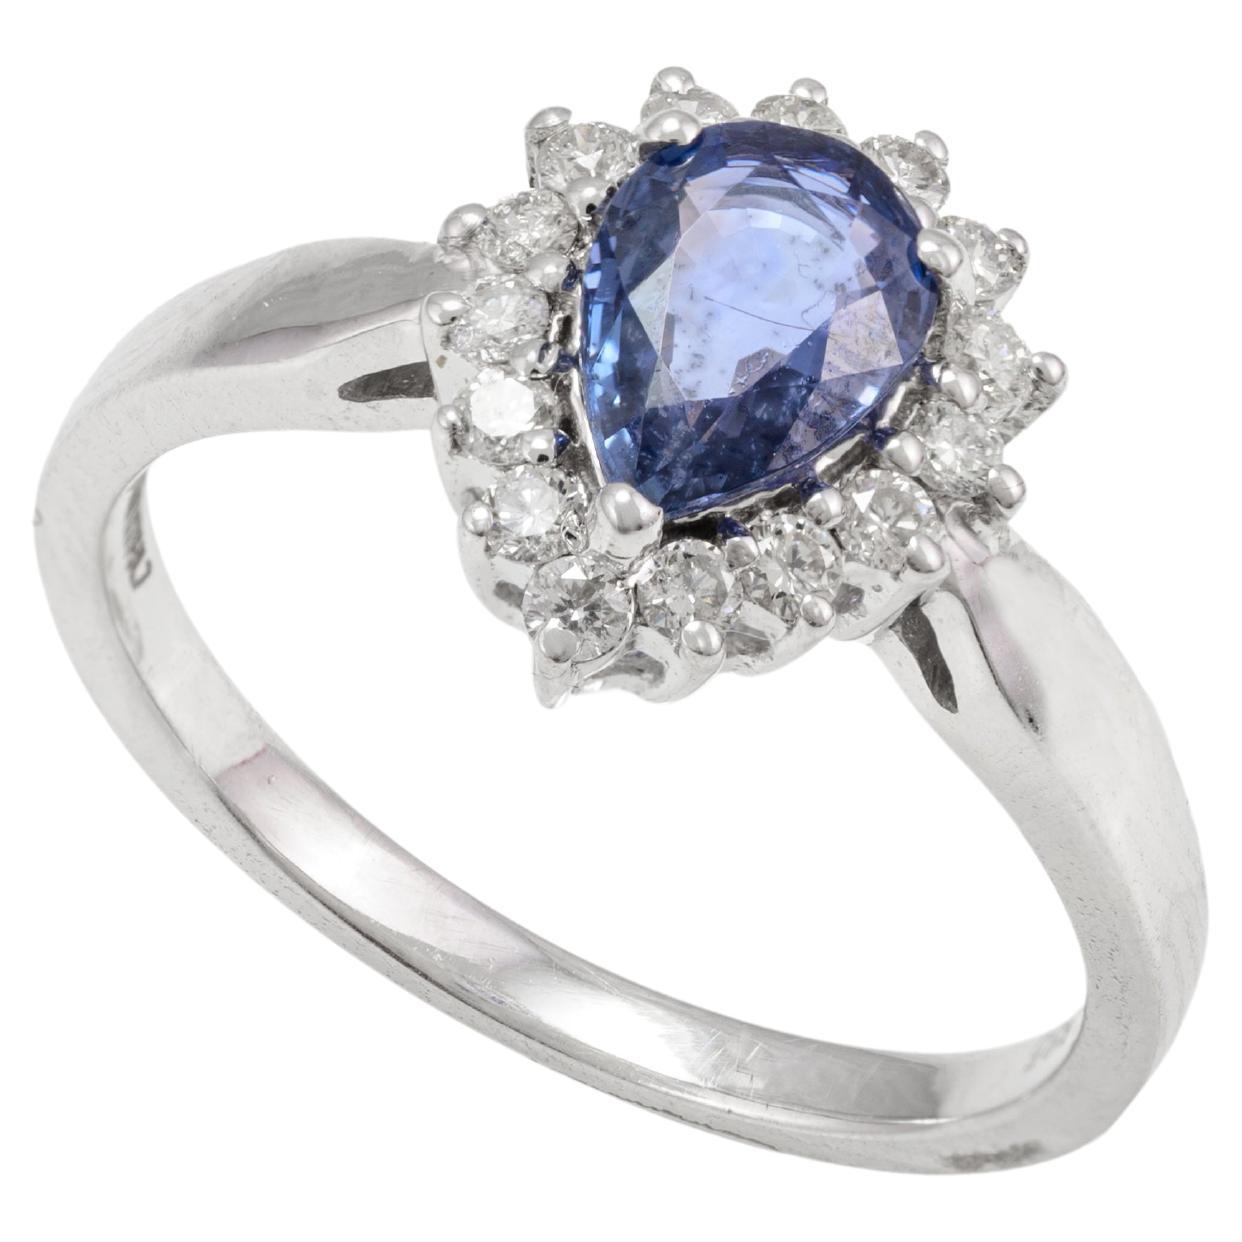 For Sale:  0.77 Carat Pear Cut Blue Sapphire and Diamond Halo Ring 14k Solid White Gold